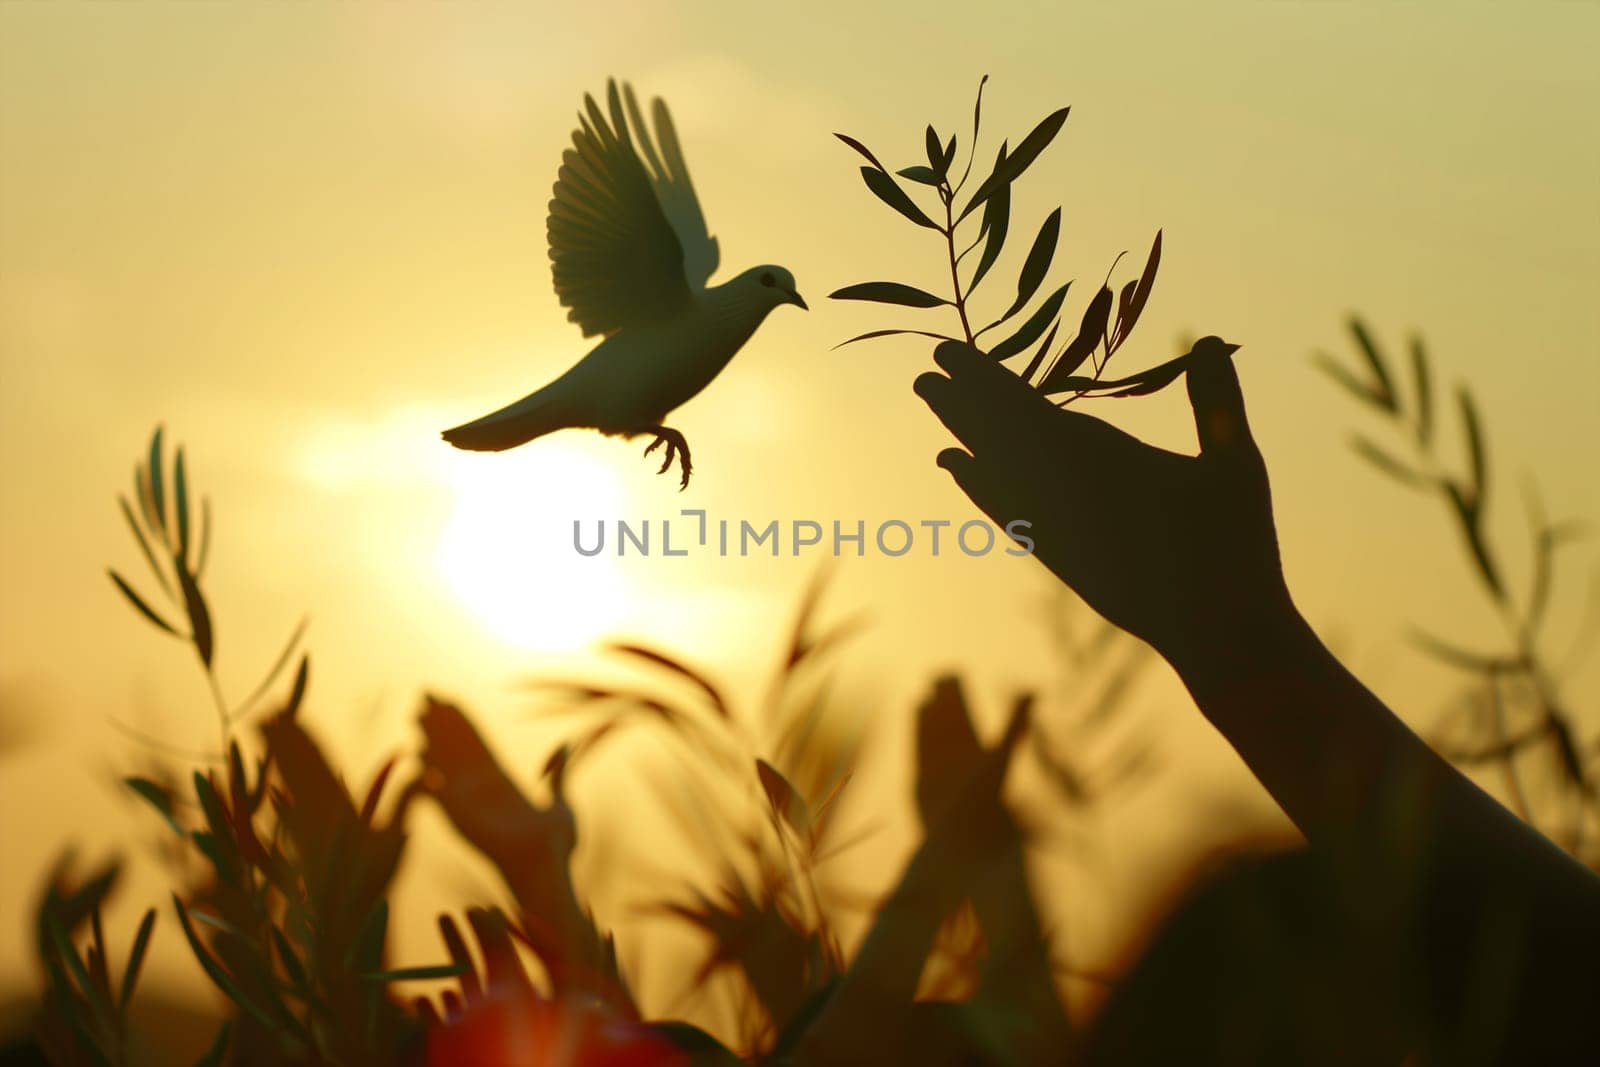 A bird is seen flying gracefully over a persons outstretched hand, with the sun shining brightly in the background.